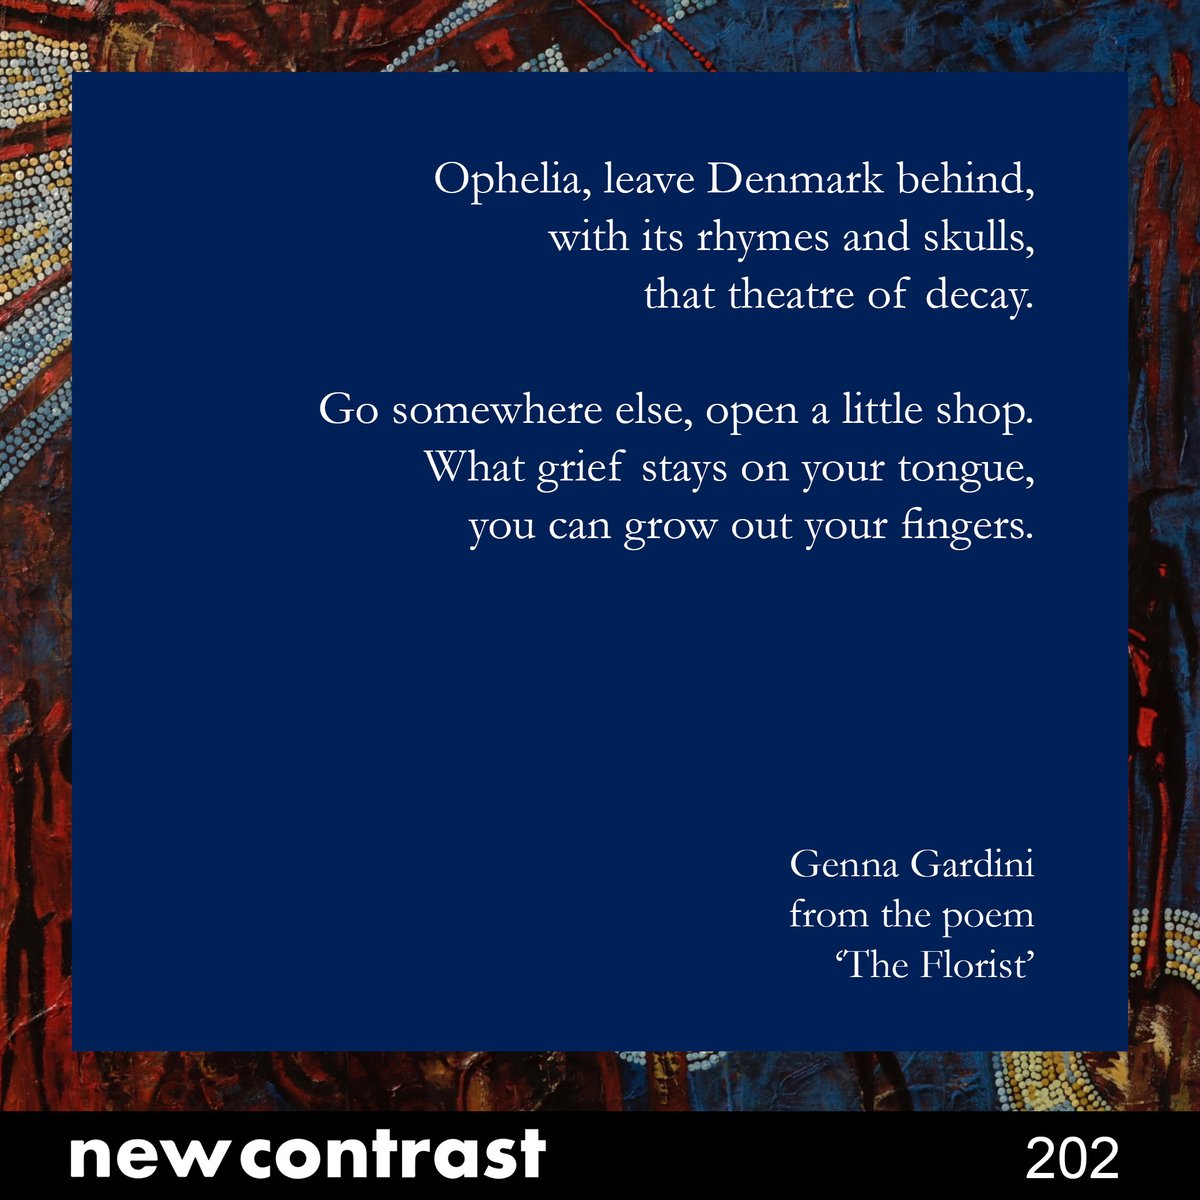 New Contrast 202 preview featuring the poem 'The Florist' by @gennagardini #winter #poetry #literarymagazine #southafricanart #artsandculture